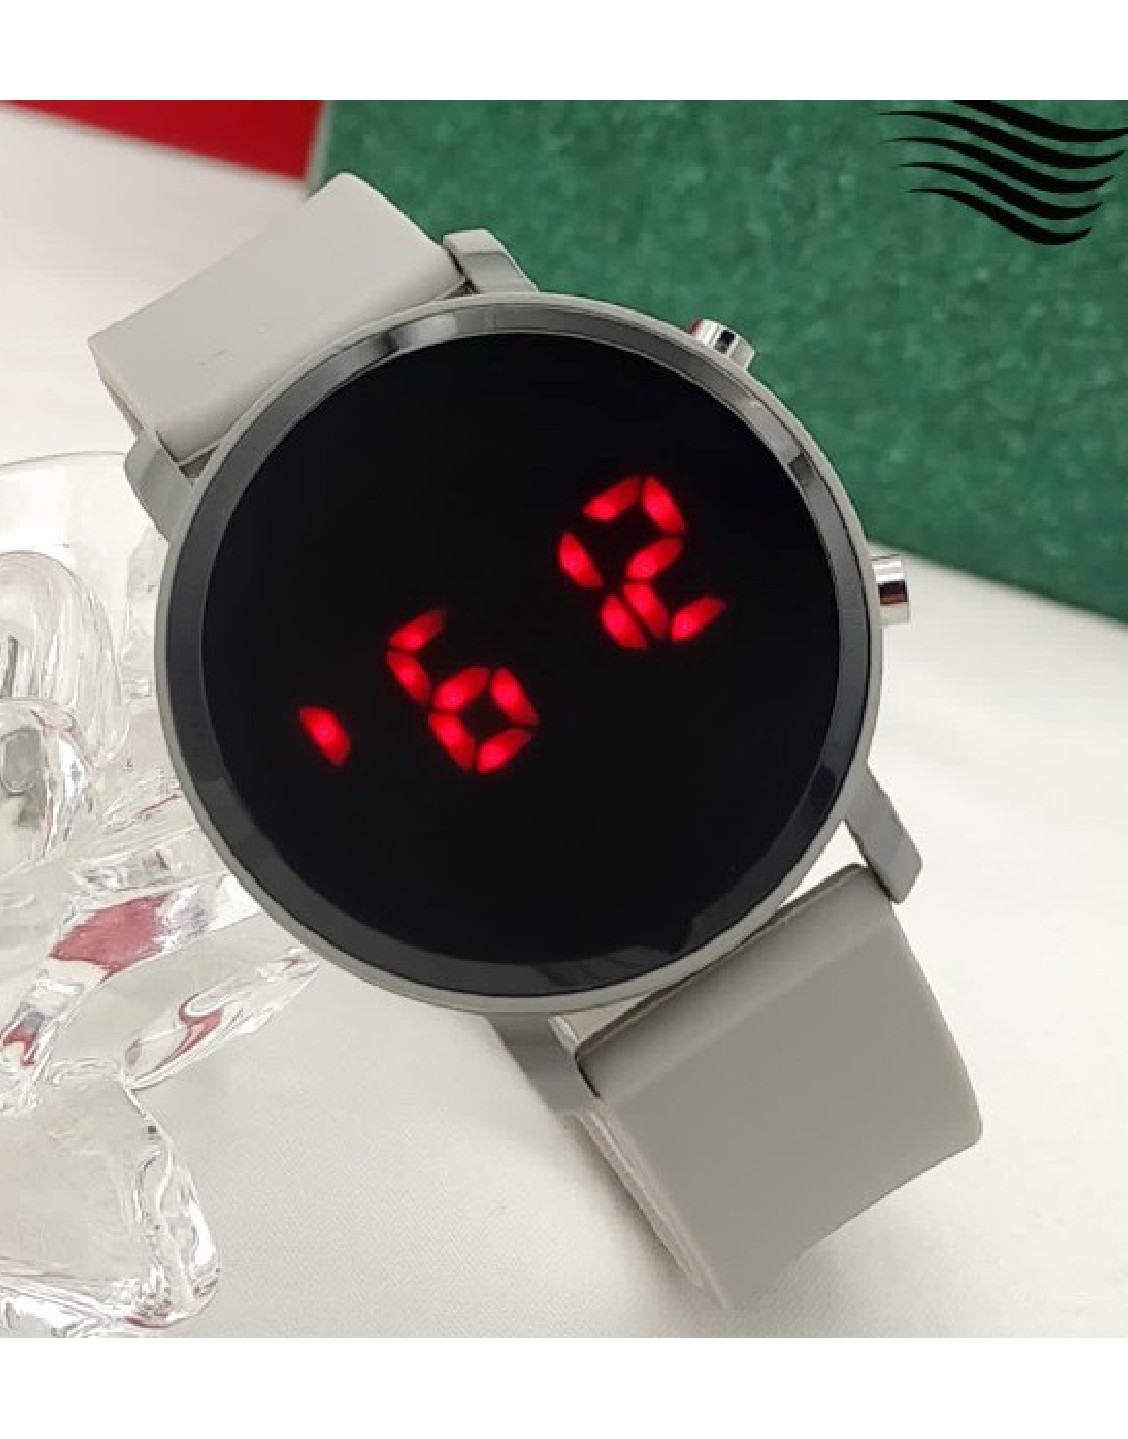 LED Touch Screen Rubber Strap Watch for Kids - Grey Price in Pakistan ...